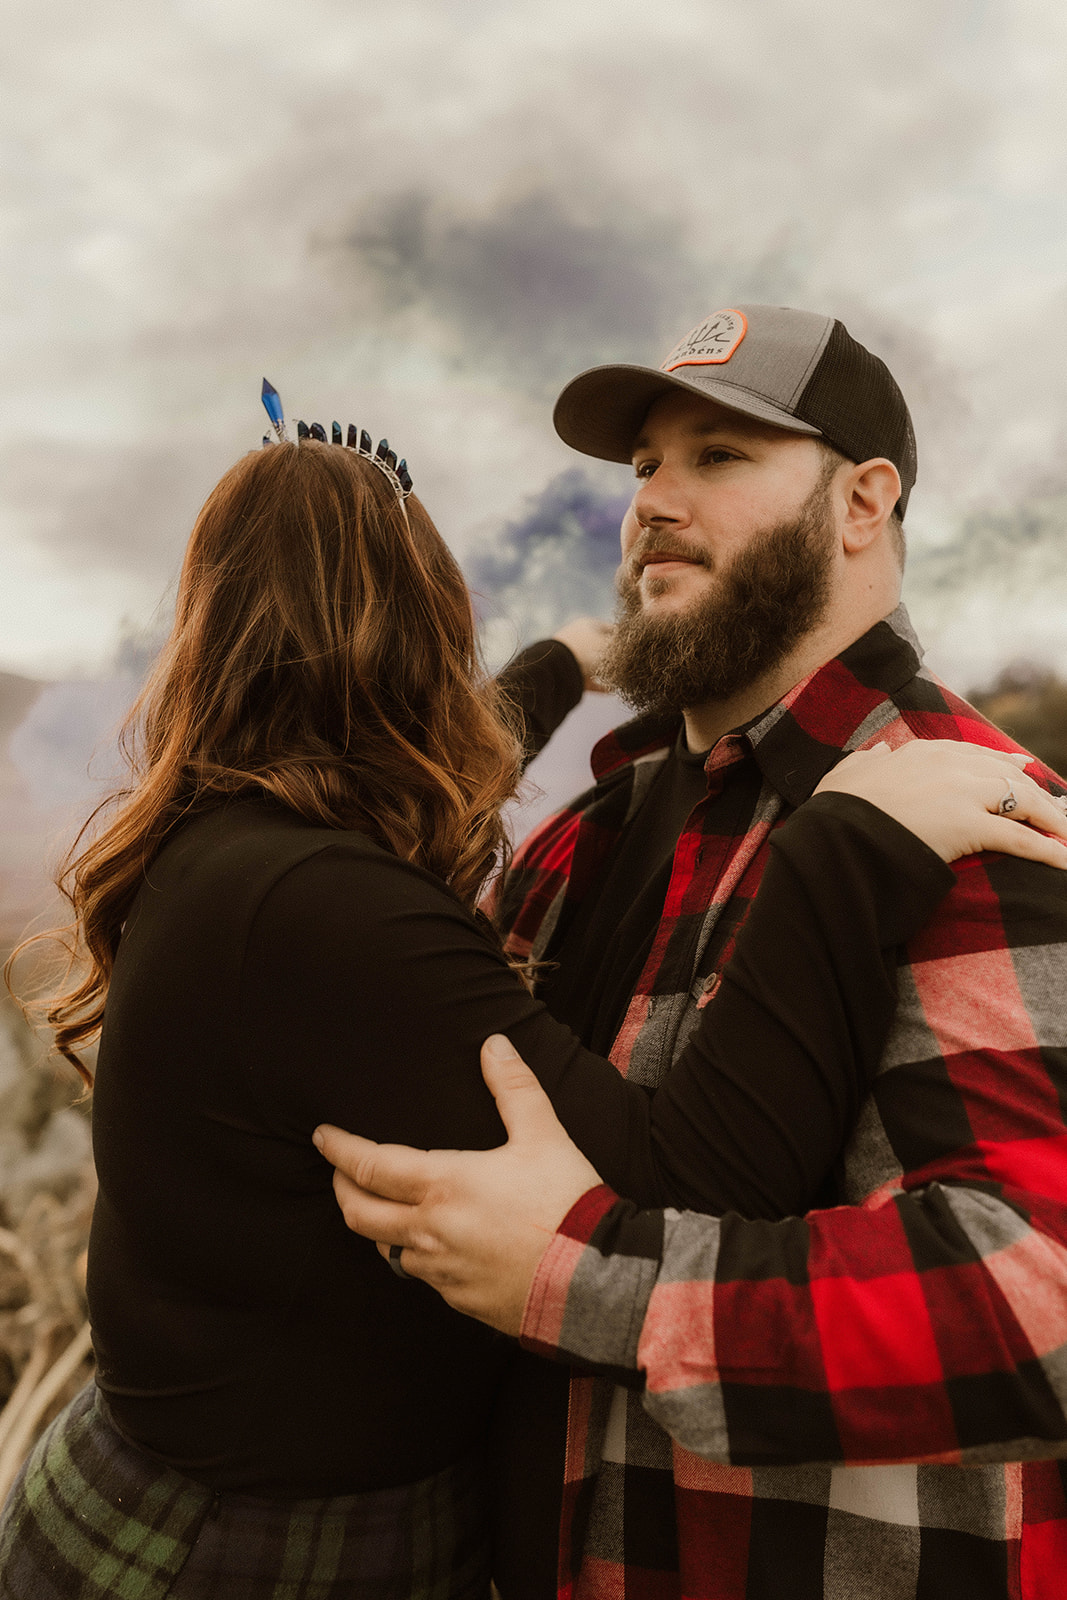 Stunning couple pose together in a pumpkin patch during their Upstate New York farm engagement photos